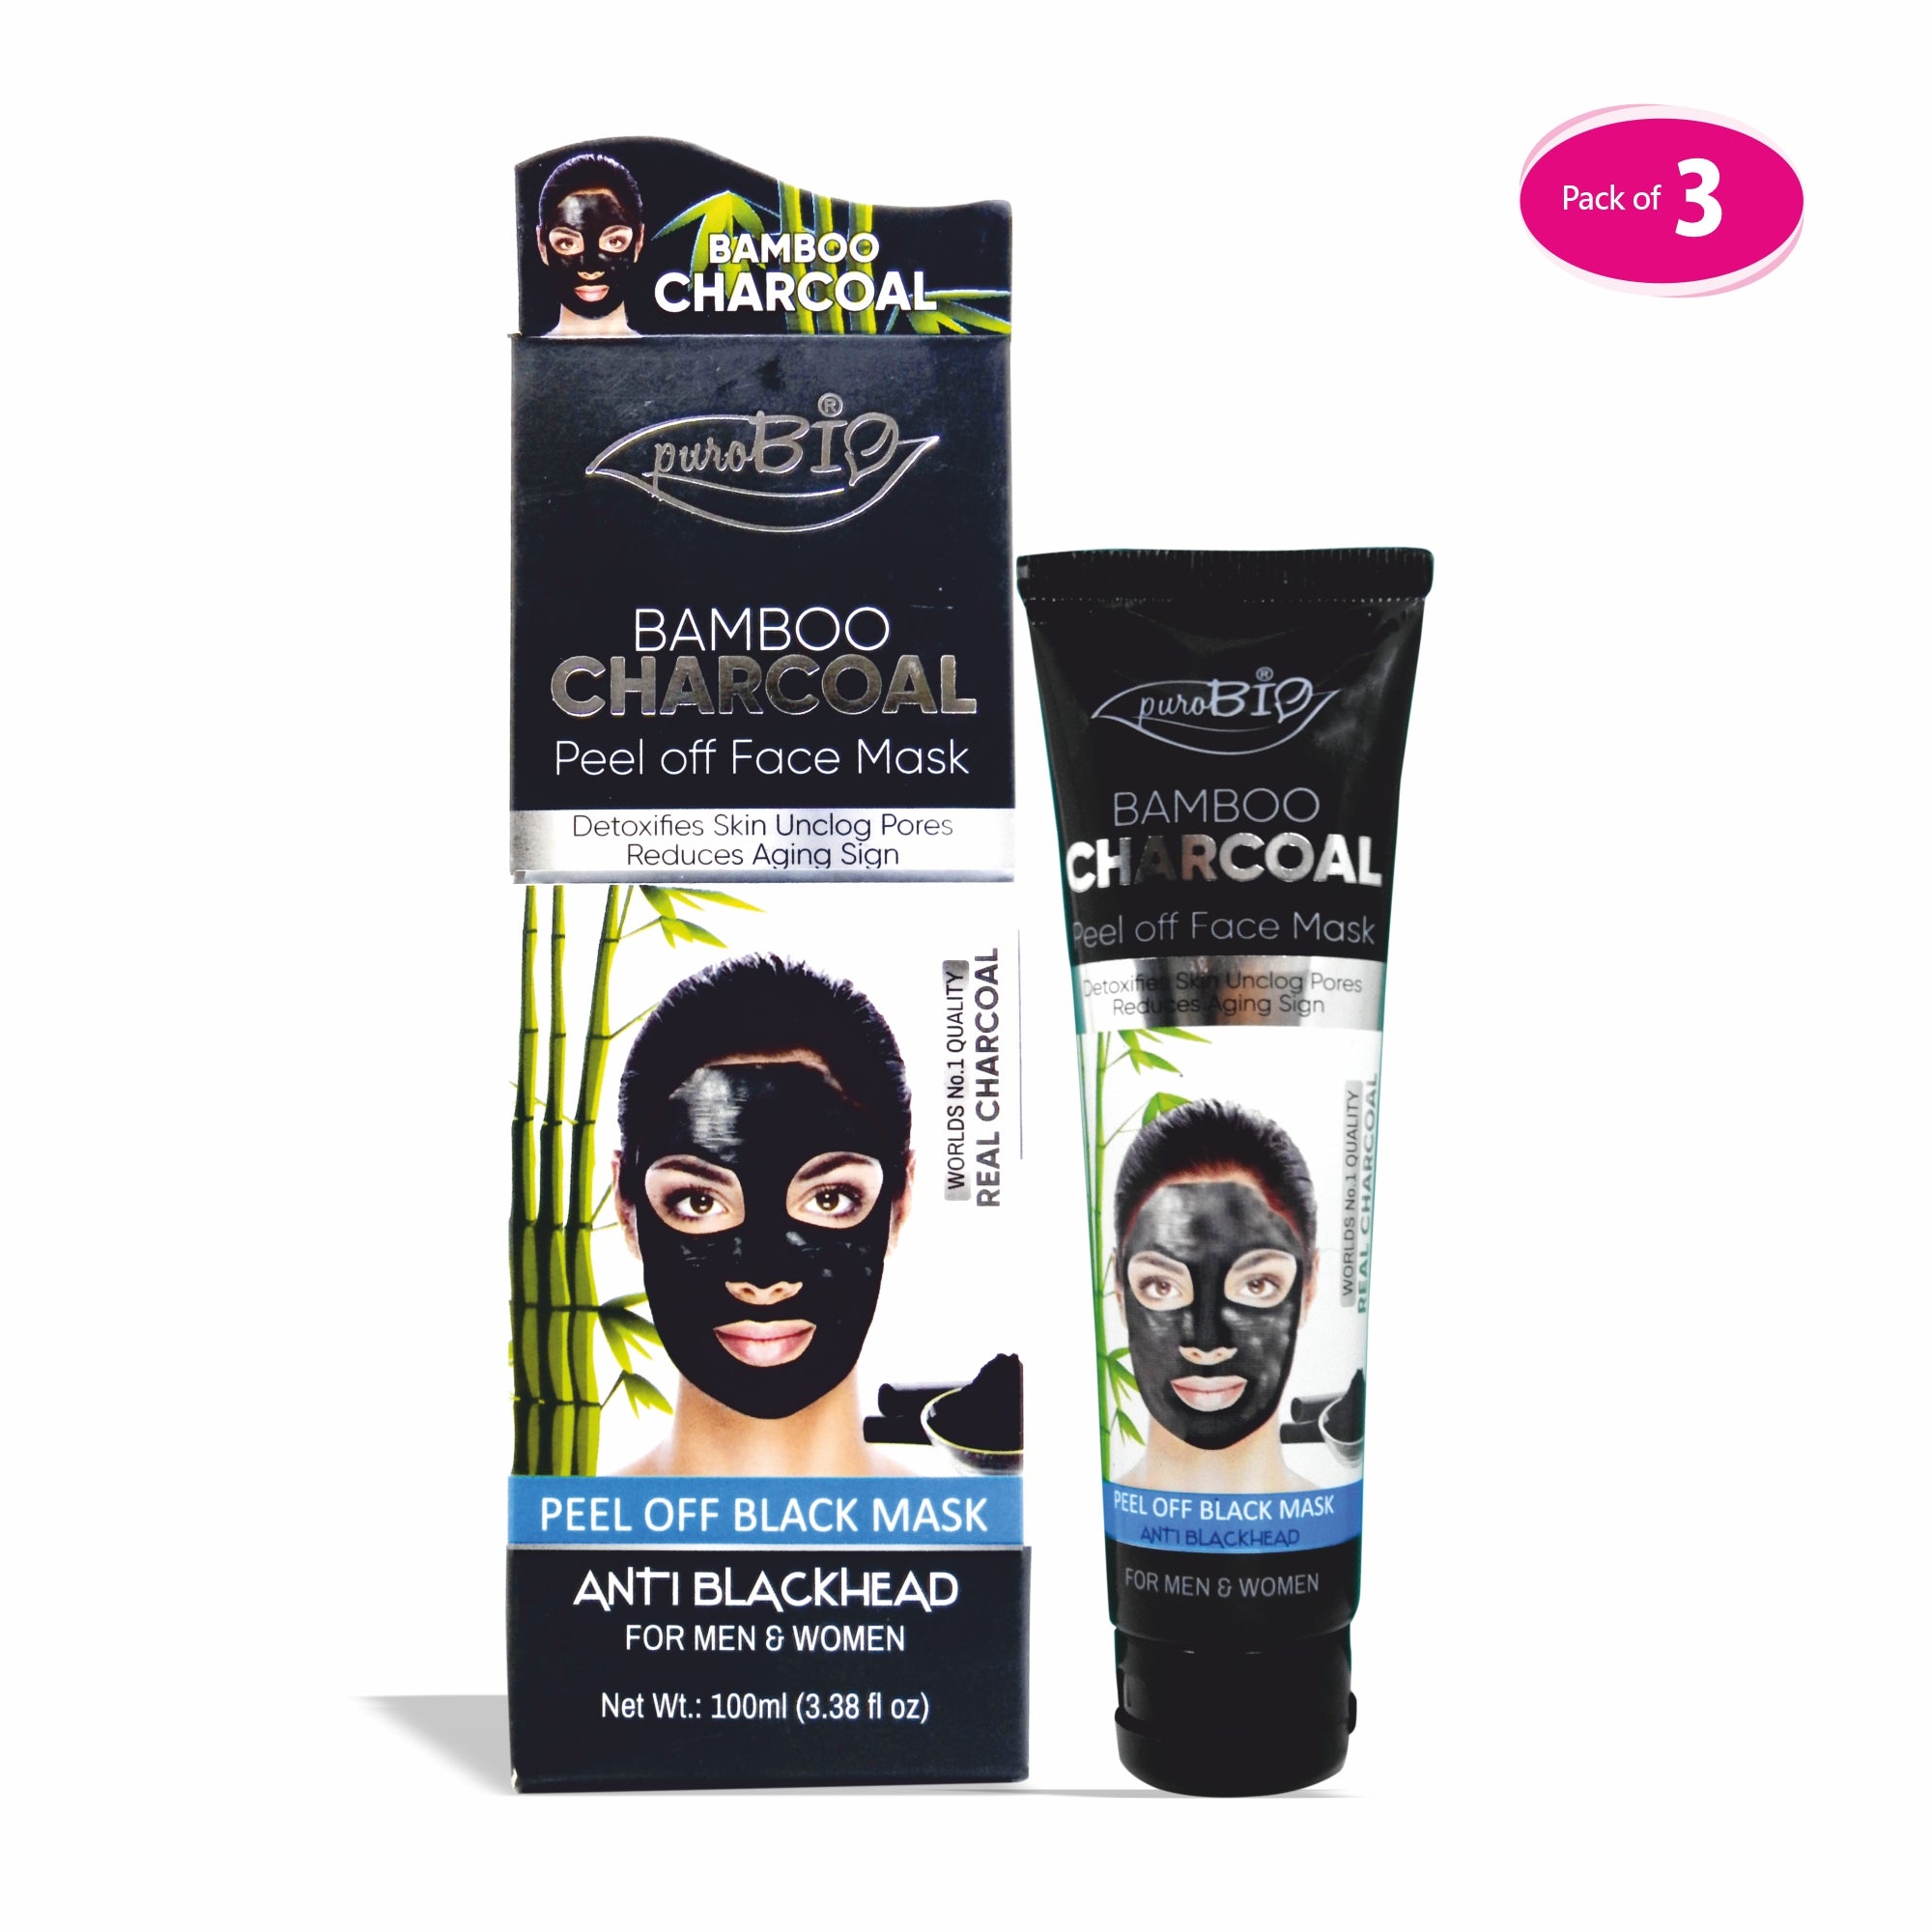 Bamboo Charcoal Peel Off Face Mask in bulk 3 quantity